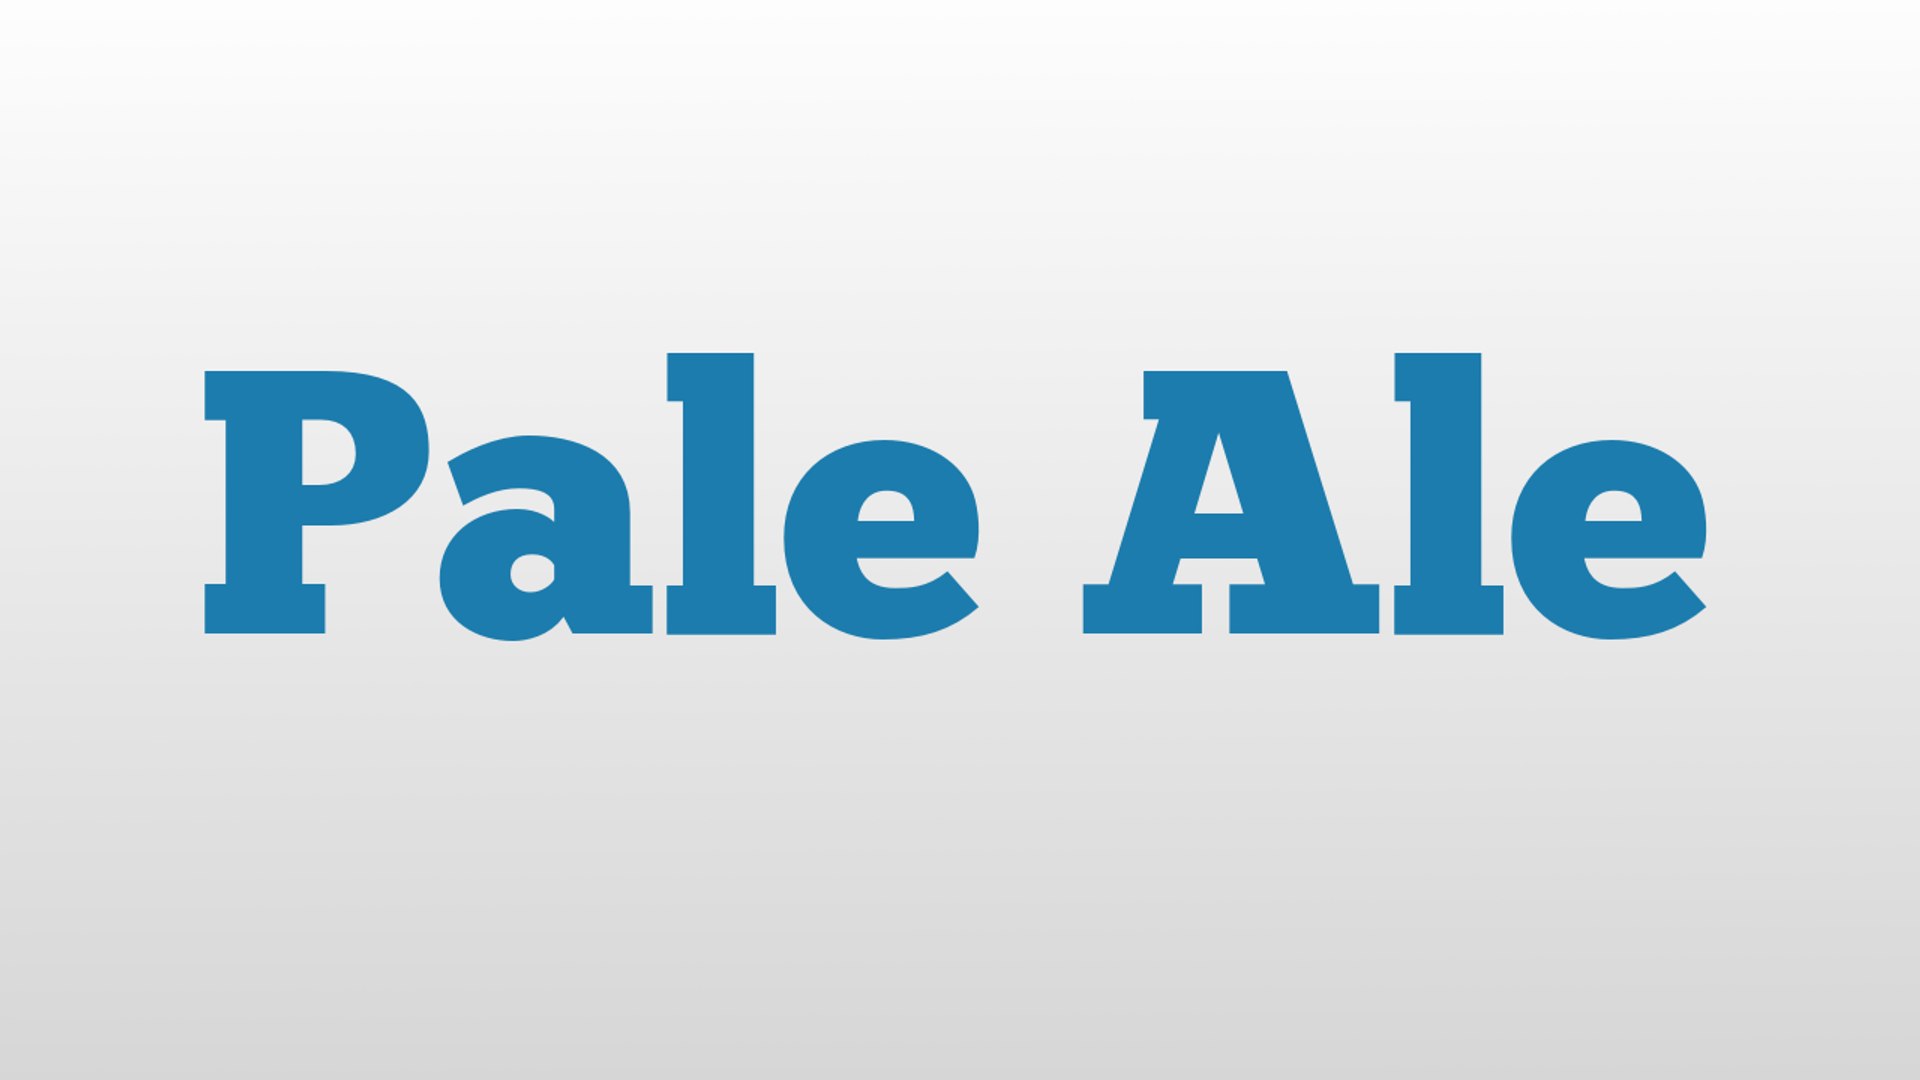 Pale Ale meaning and pronunciation